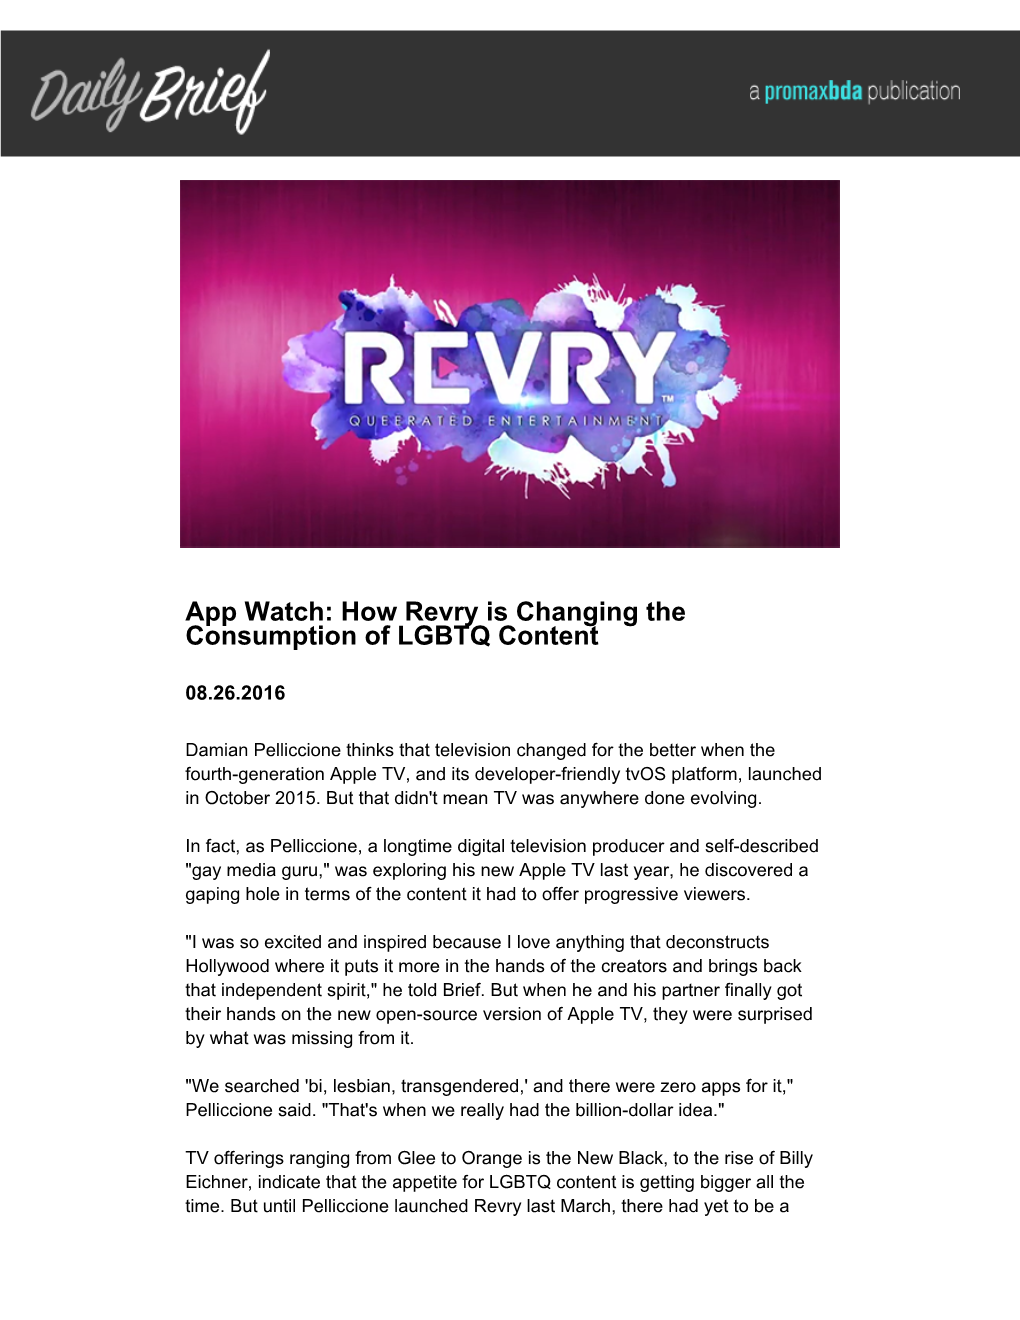 How Revry Is Changing the Consumption of LGBTQ Content